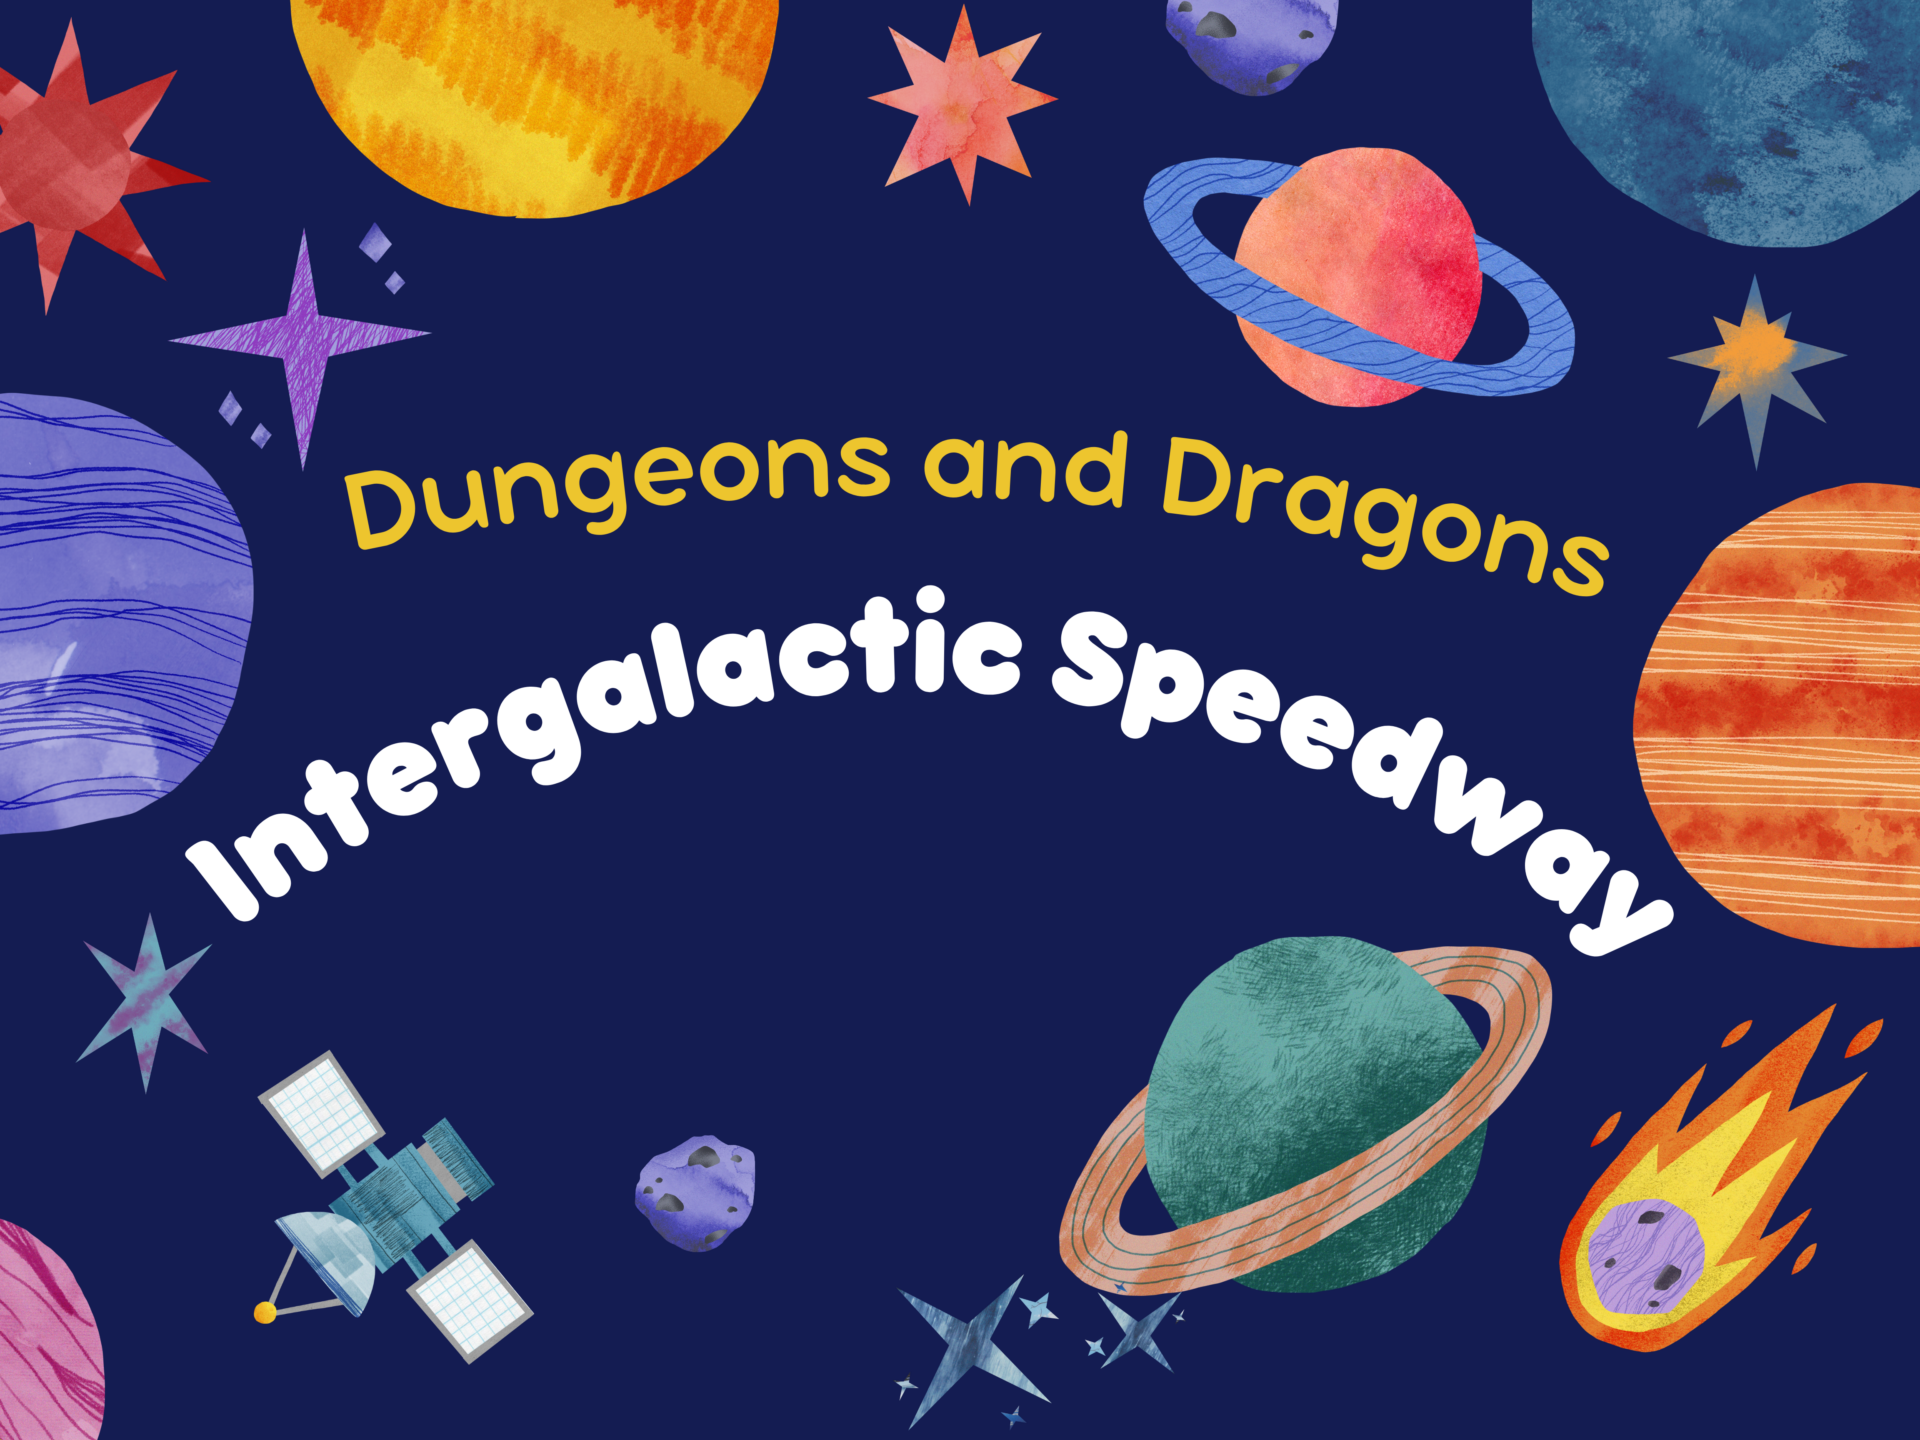 Image of Dungeons and Dragons: Intergalactic Speedway event